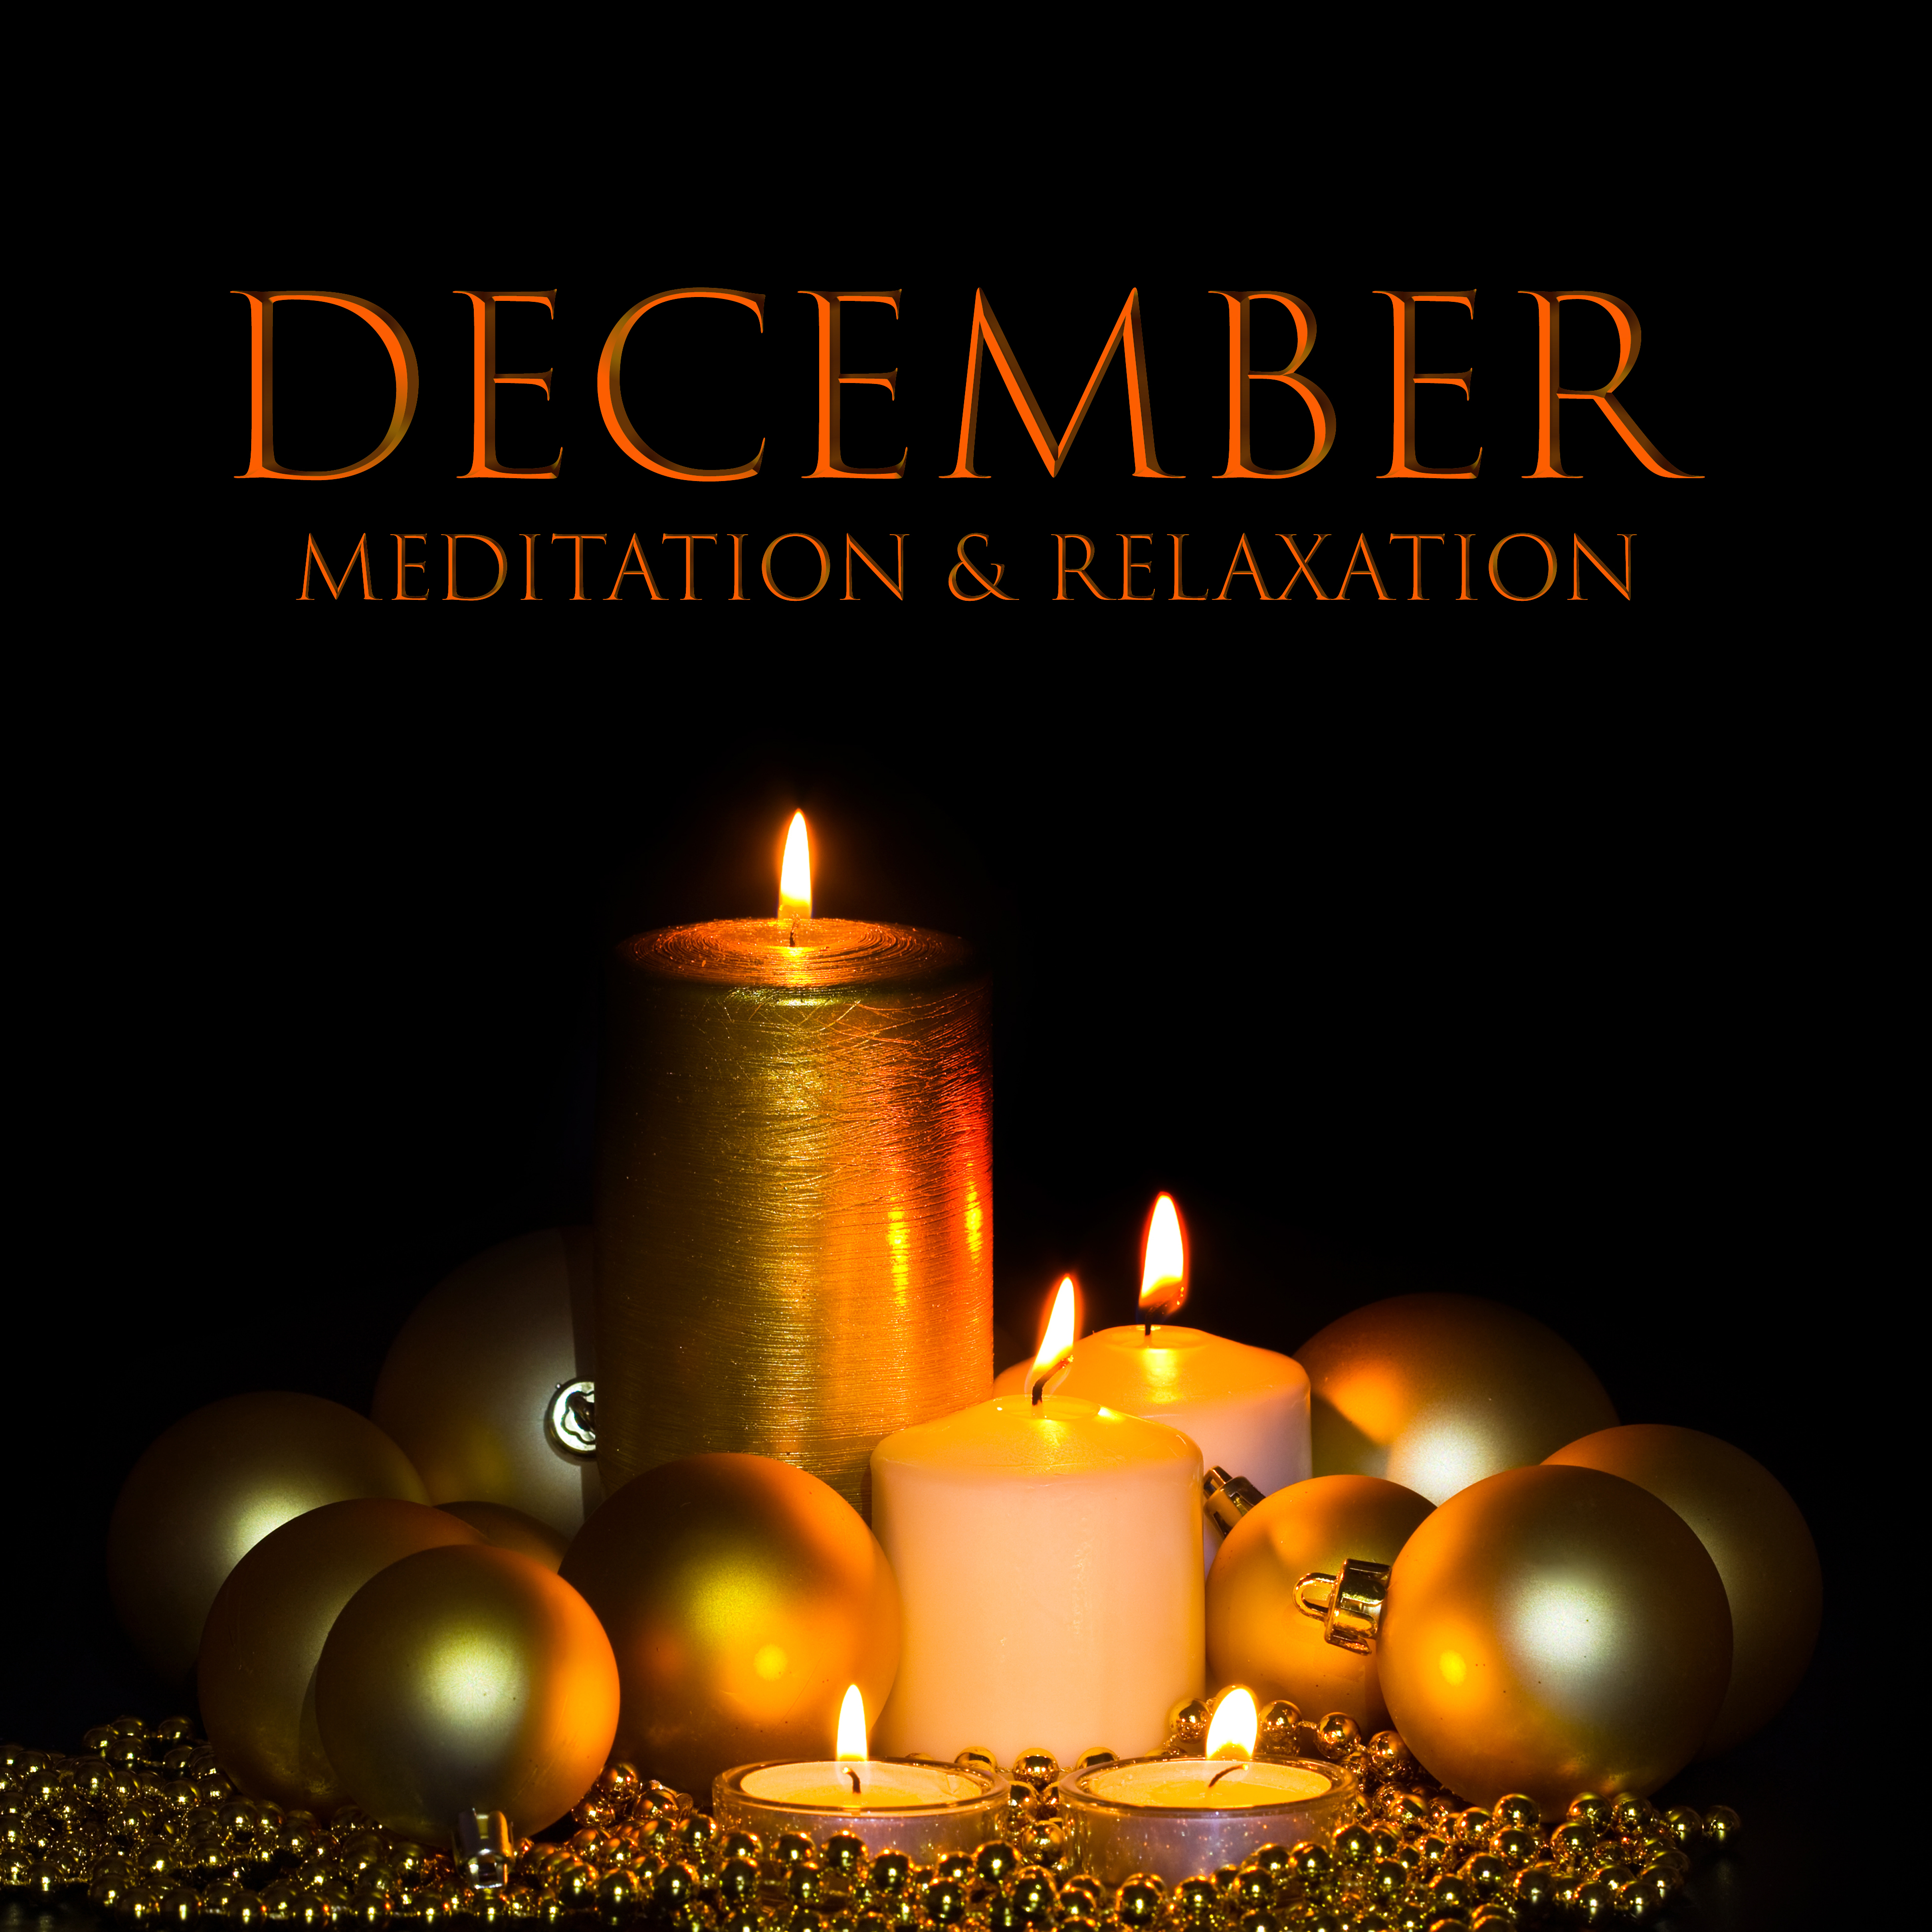 December Meditation & Relaxation – Nature Sounds for Yoga Relaxation, Spiritual Tracks for Meditation, Healing Music to Calm Down